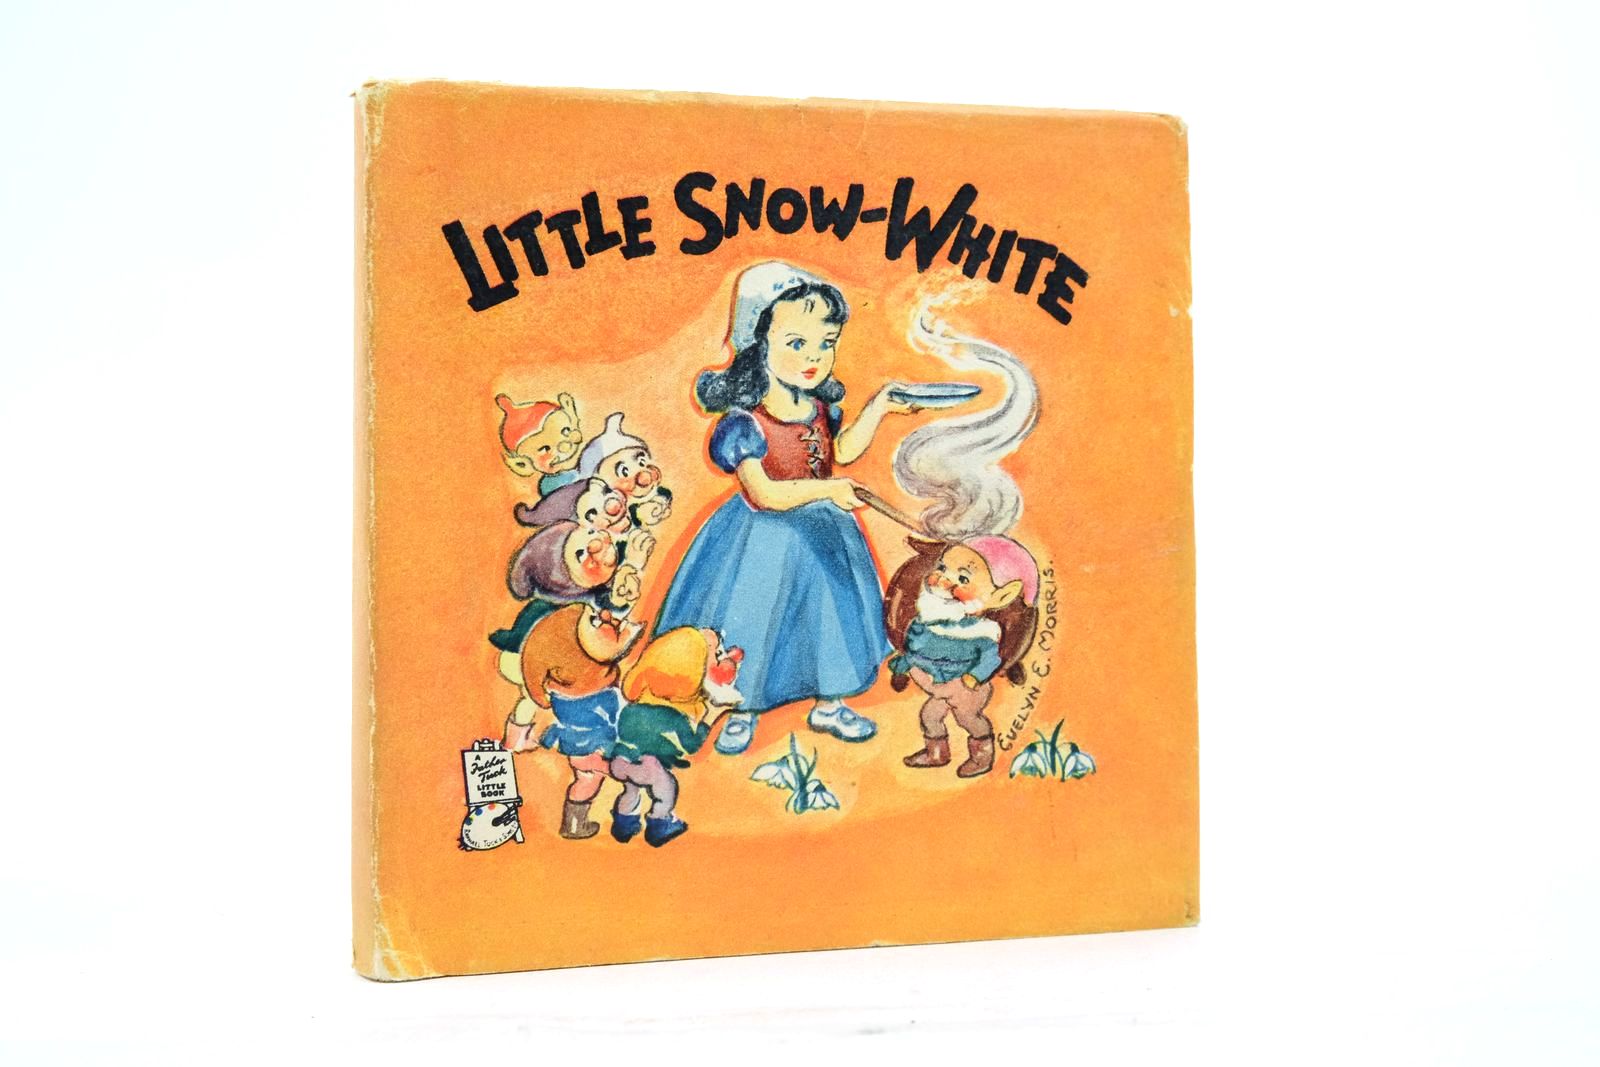 Photo of LITTLE SNOW-WHITE published by Raphael Tuck &amp; Sons Ltd. (STOCK CODE: 2138058)  for sale by Stella & Rose's Books